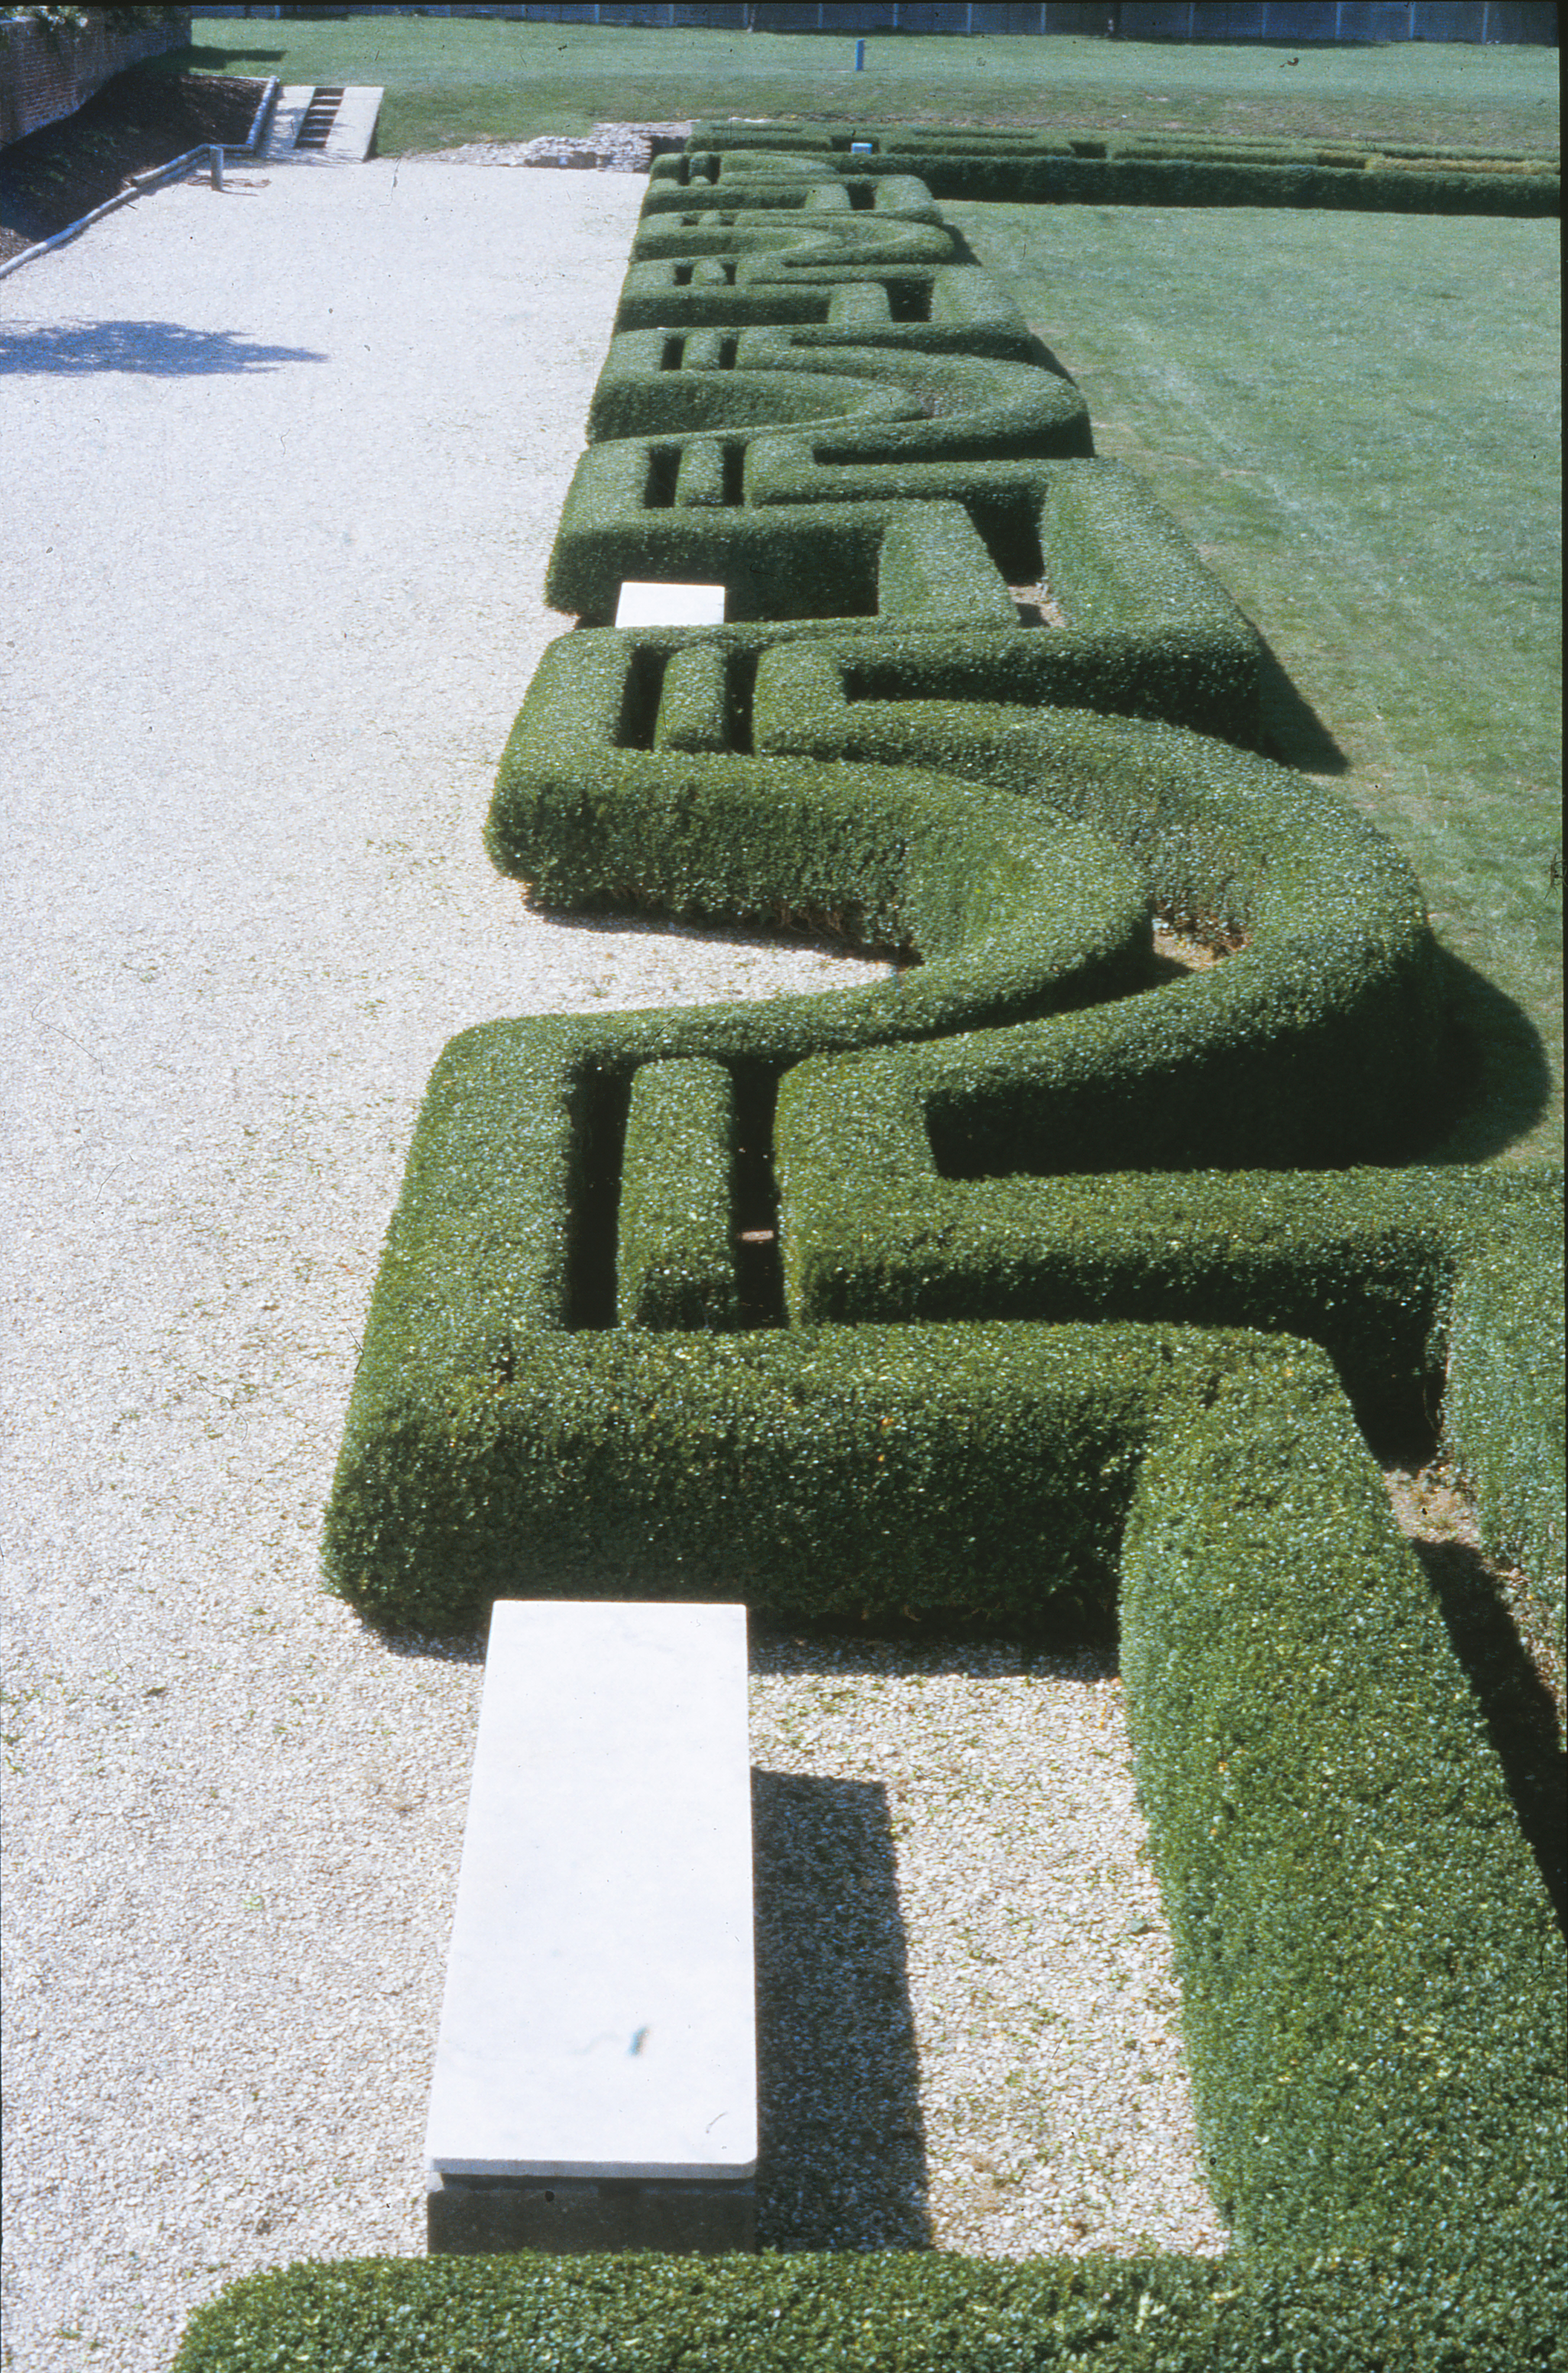 Fig. 3: View of replanted formal garden. Photo courtesy of David Rudkin for Fishbourne Roman Palace.